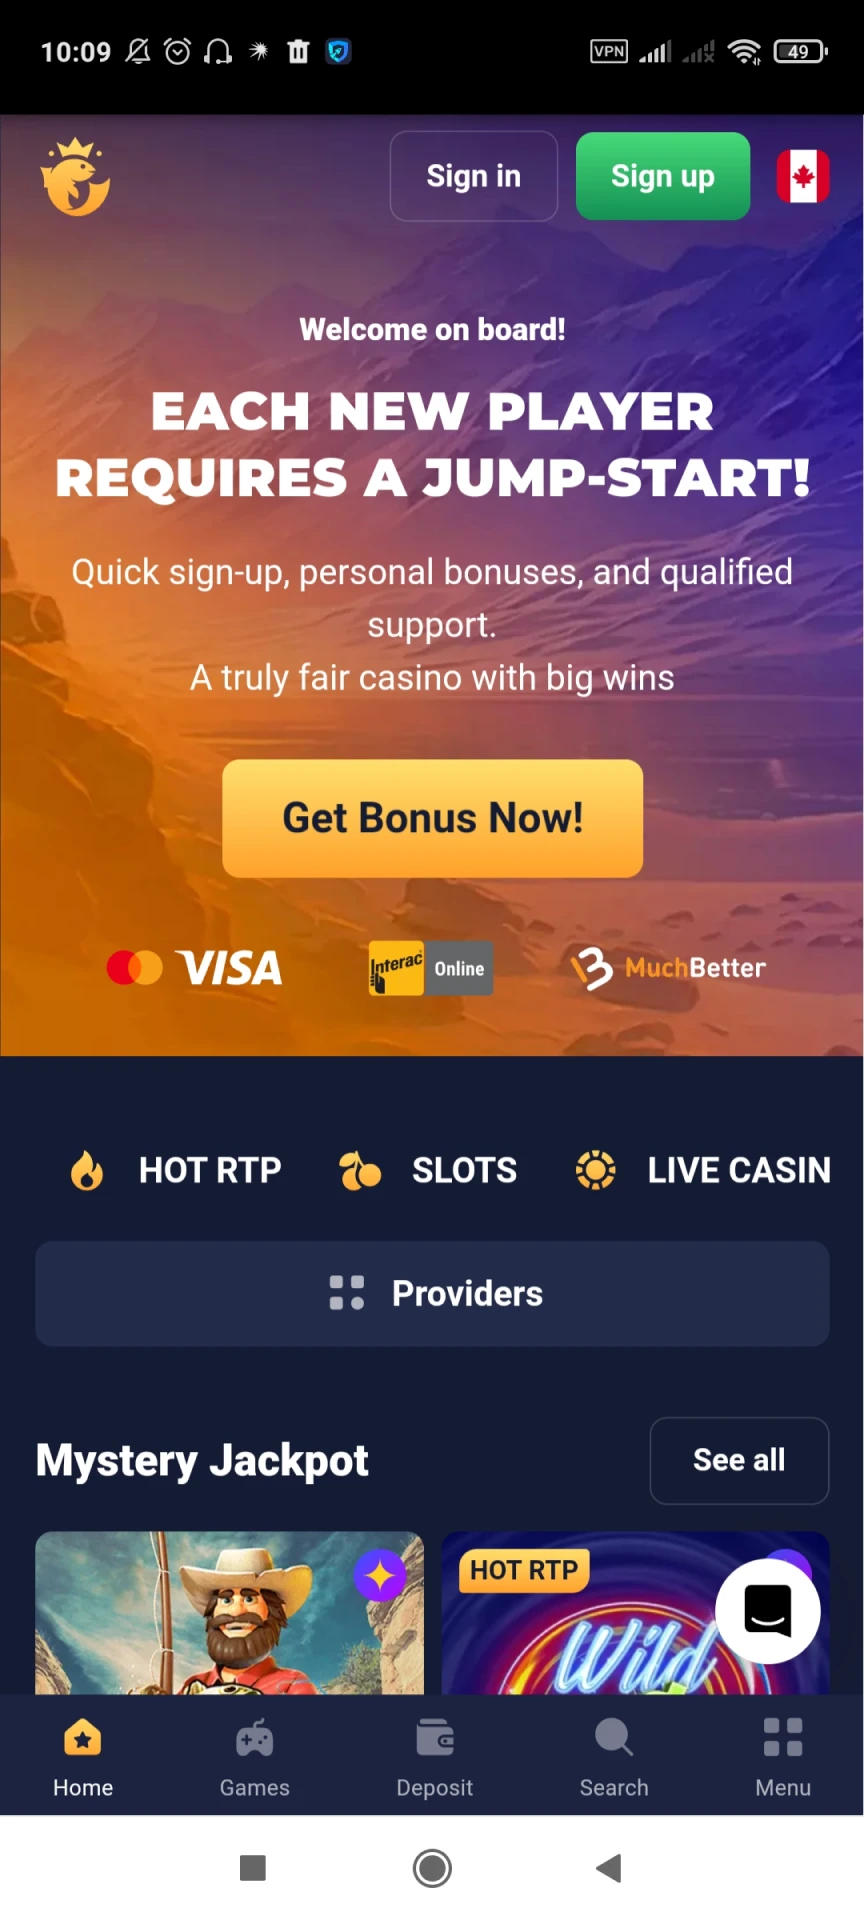 Visit the official Joo Casino page for download on Android.